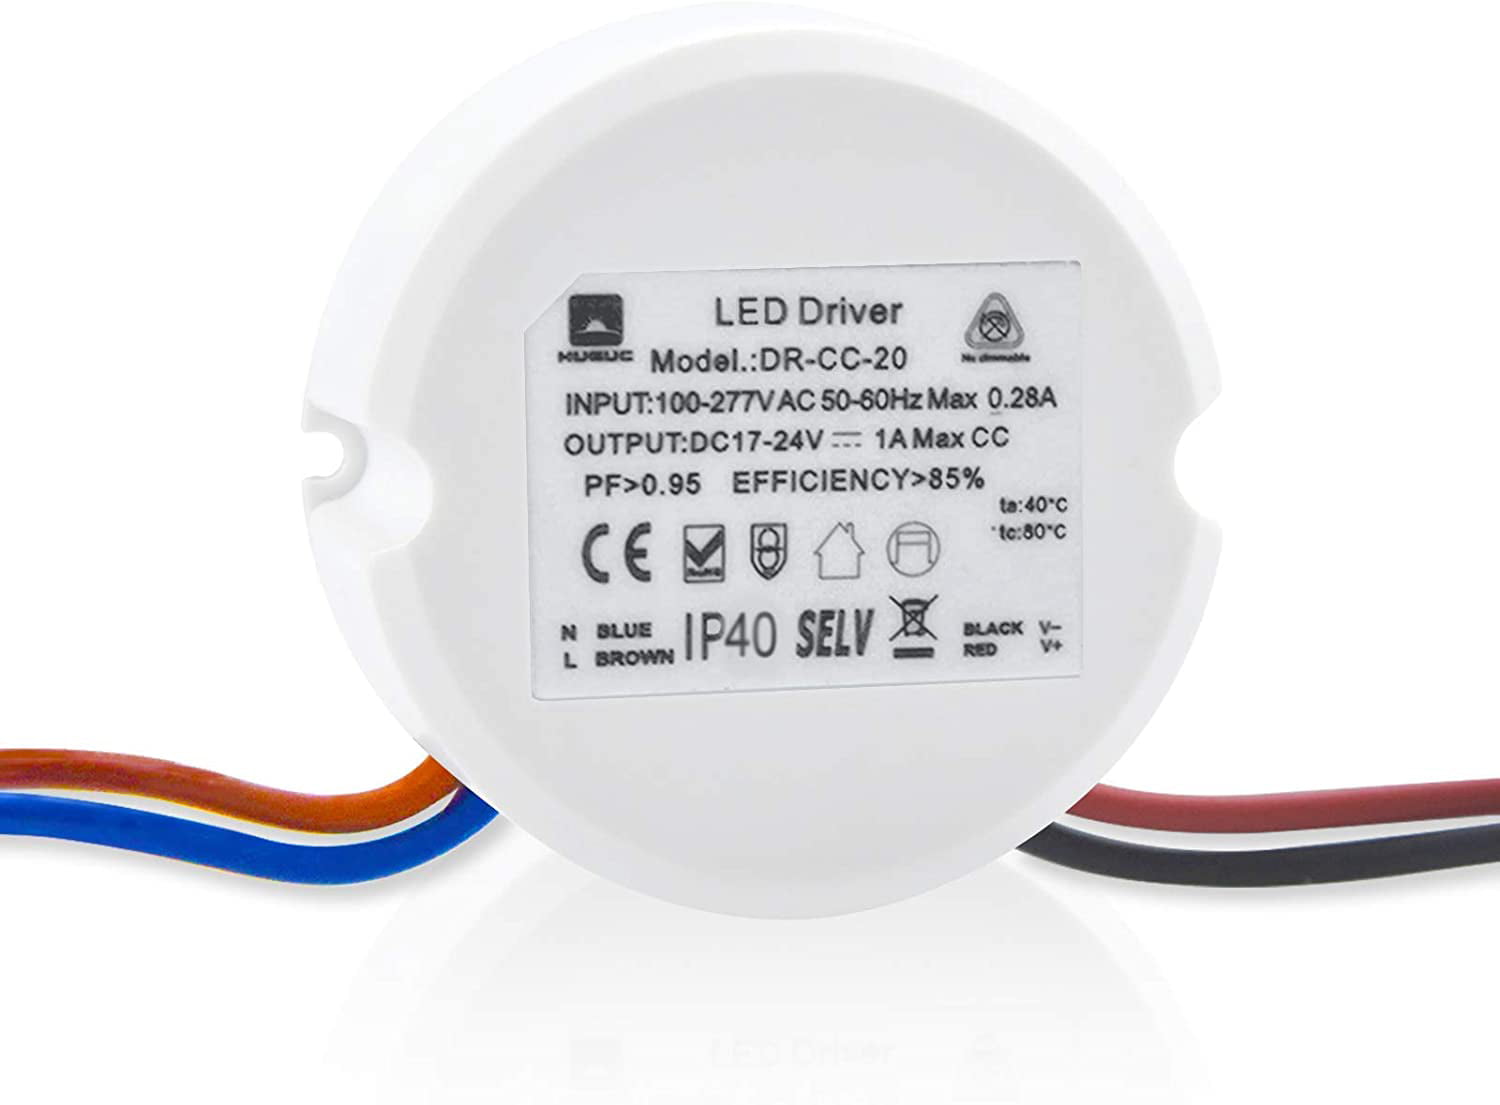 Eaglerise LED Power Supply • Damp Rated • Dimmable • Output 2.1 Amps 